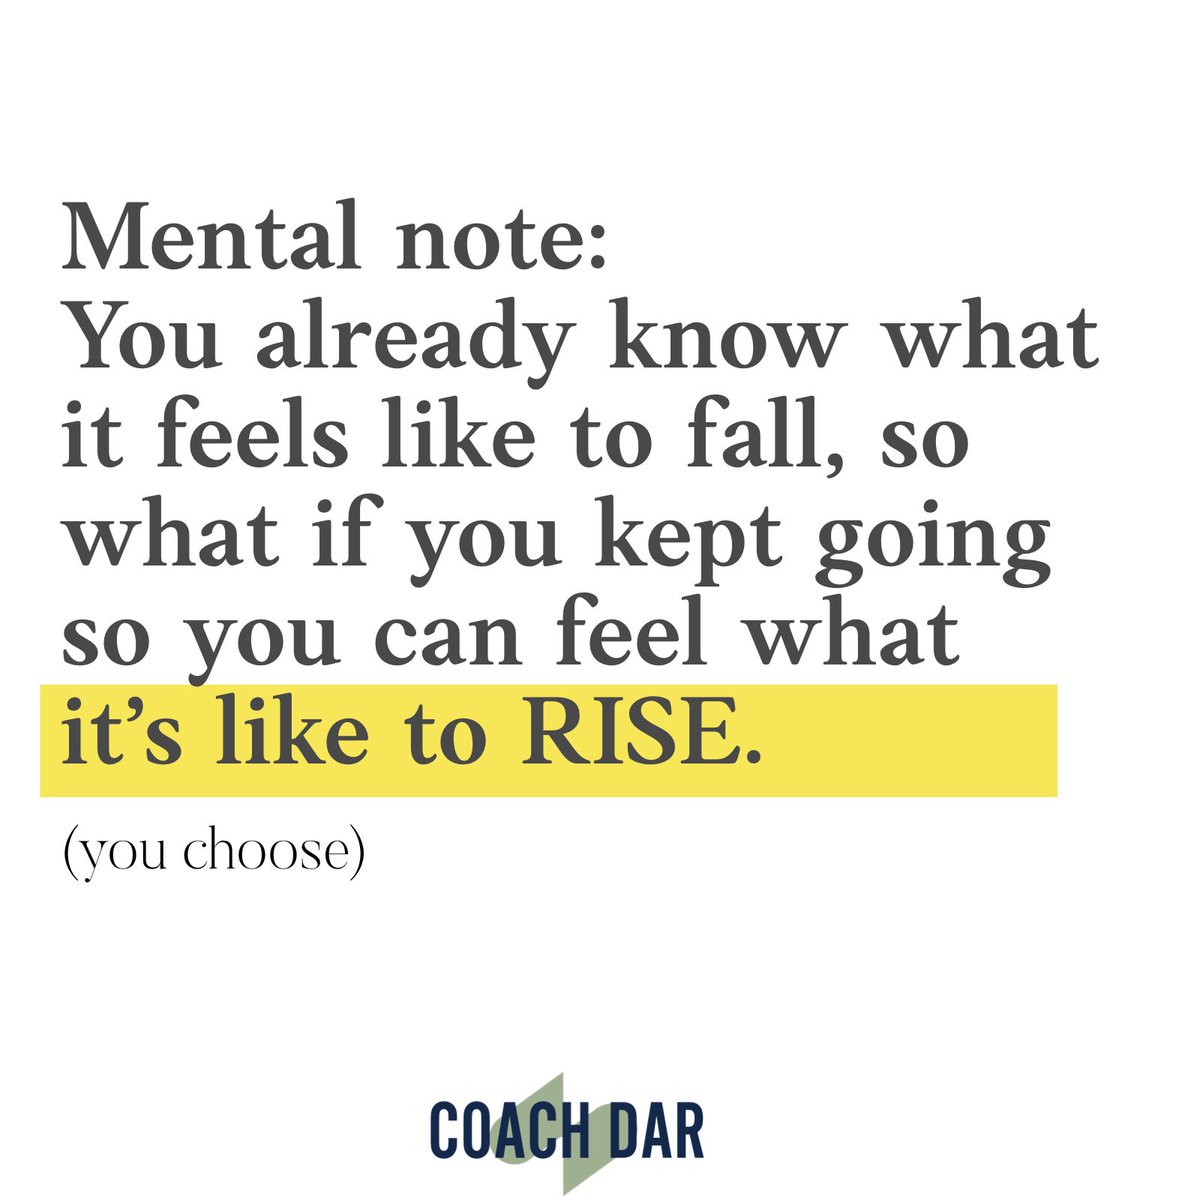 Falls are inevitable but RISING UP IS A CHOICE! Make the choice so you can have the chance to Rise! #mentalfuel